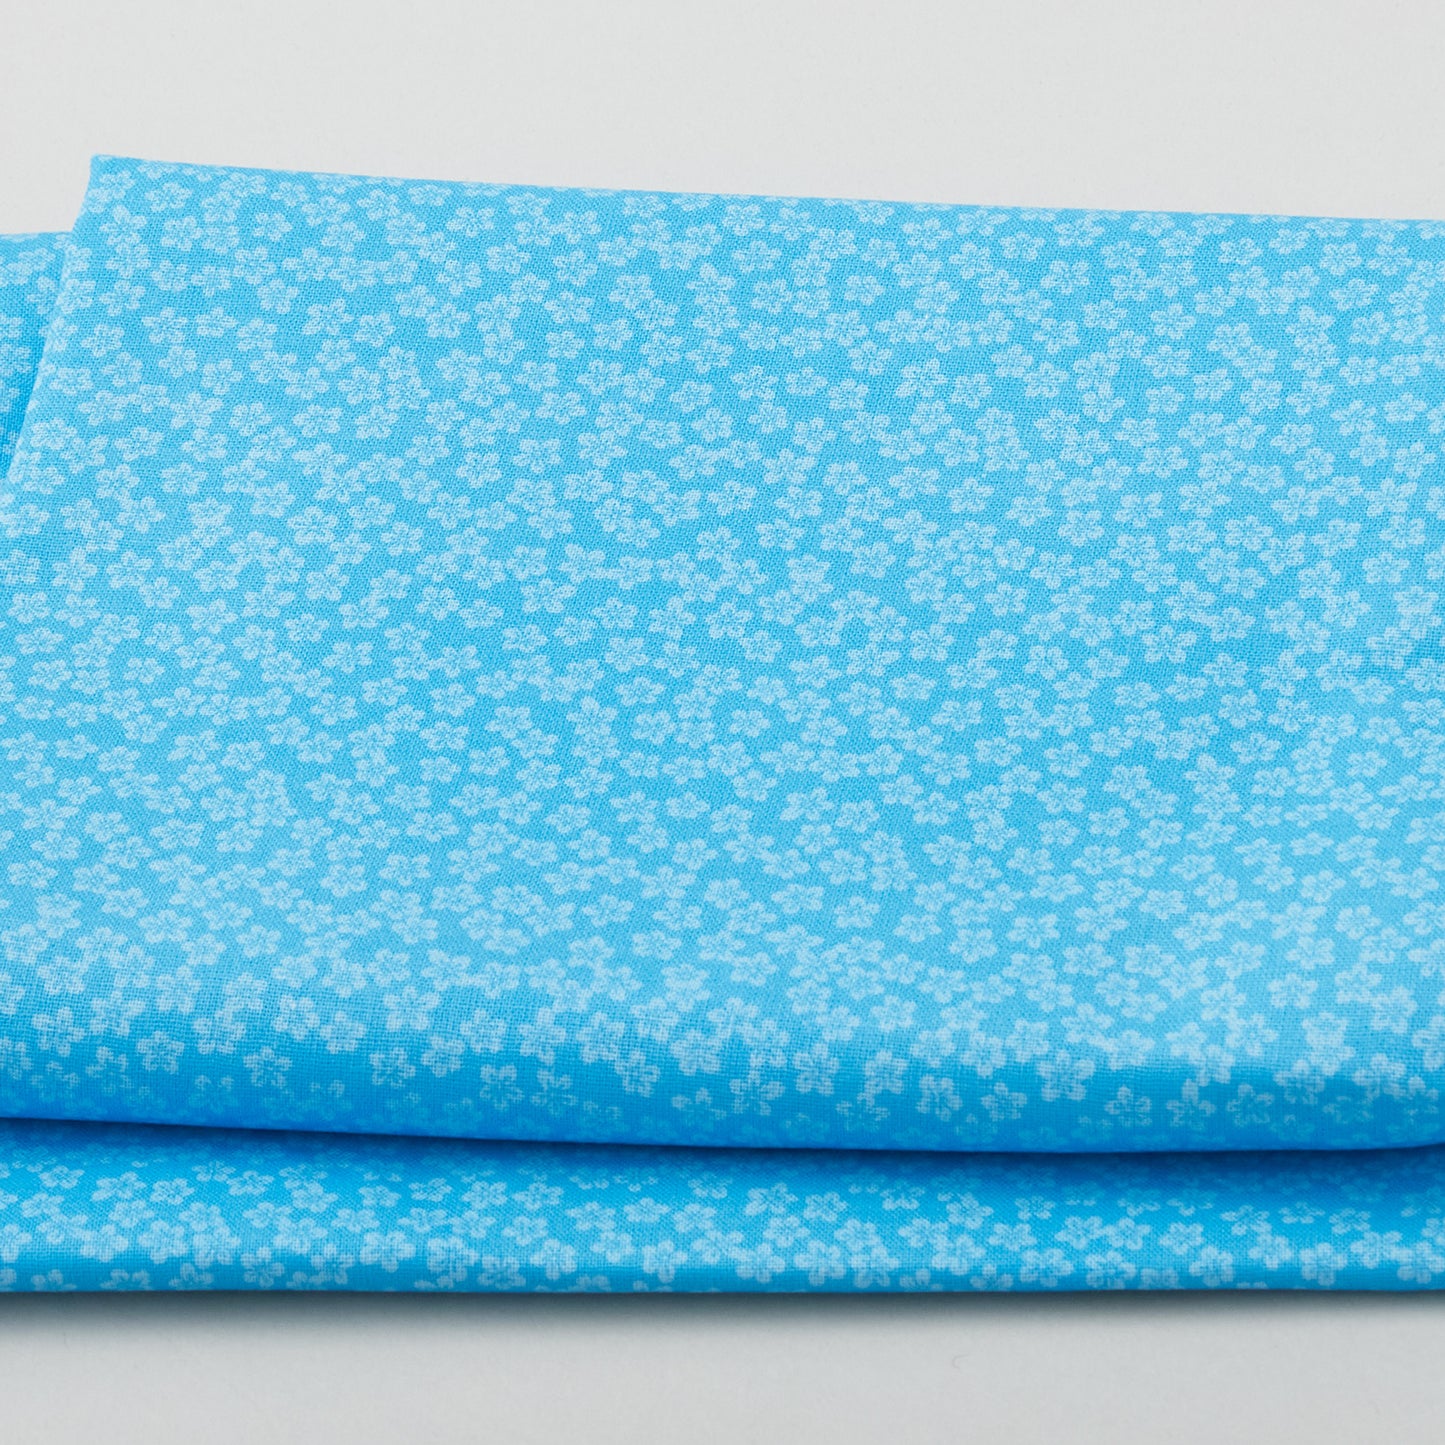 Simply Ditsy Blender - Turquoise 2 Yard Cut Primary Image